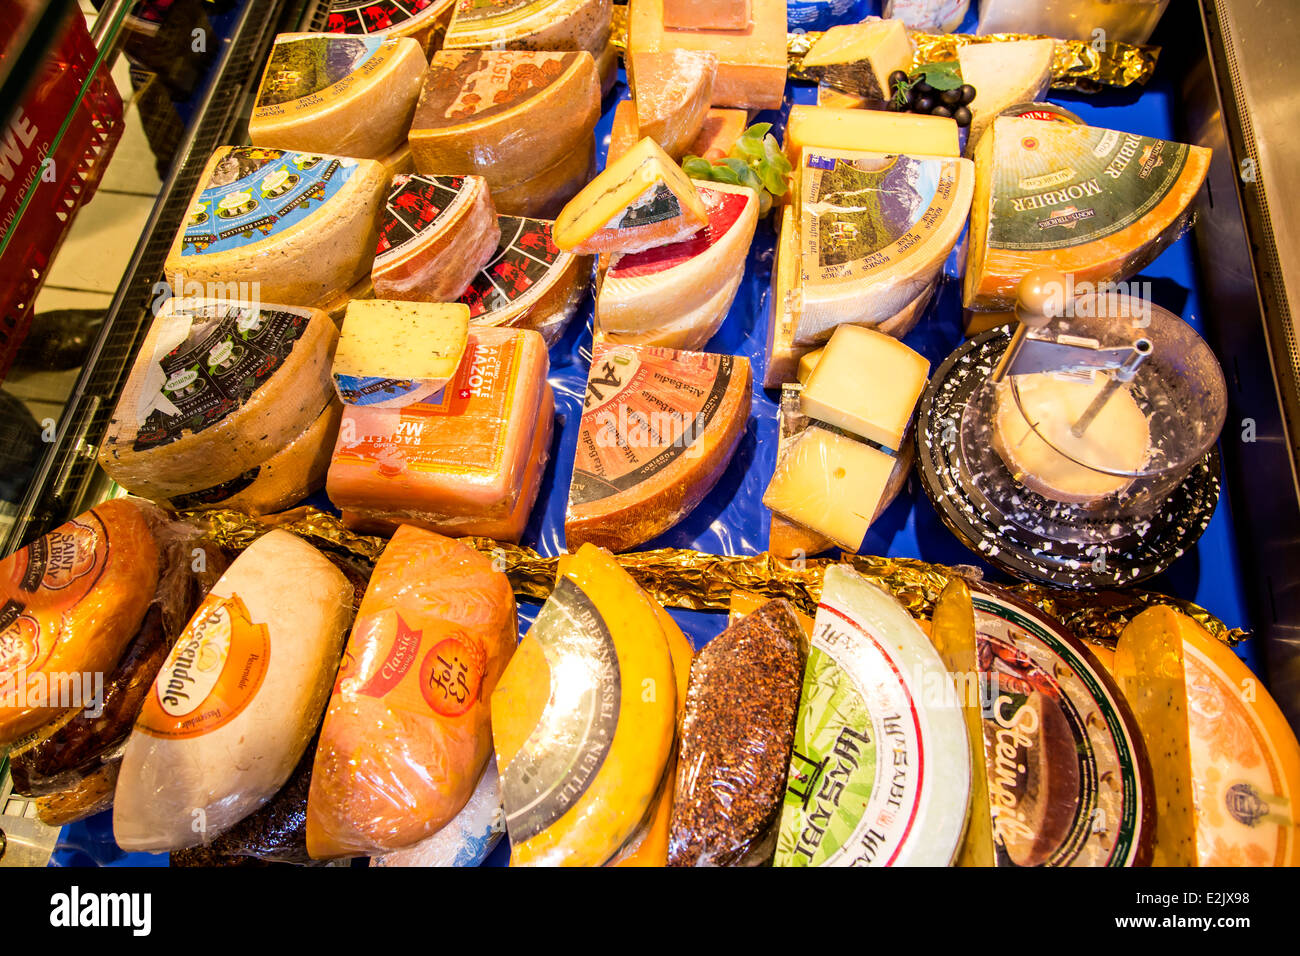 Shelf with food in a supermarket. cheese, Stock Photo